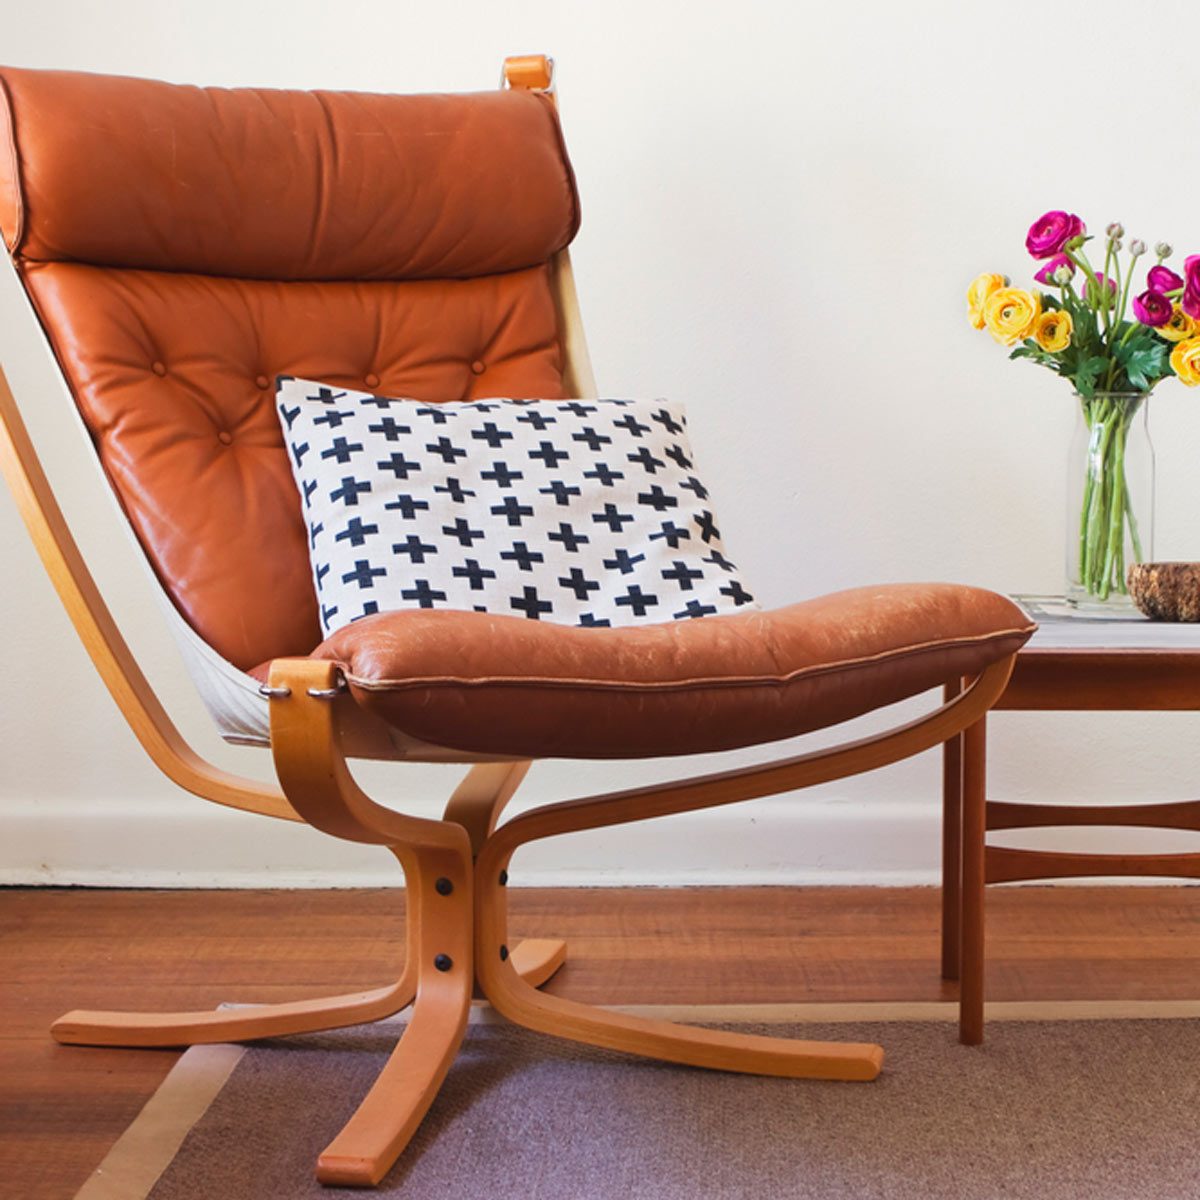 How to Care for Your Indoor Teak Furniture